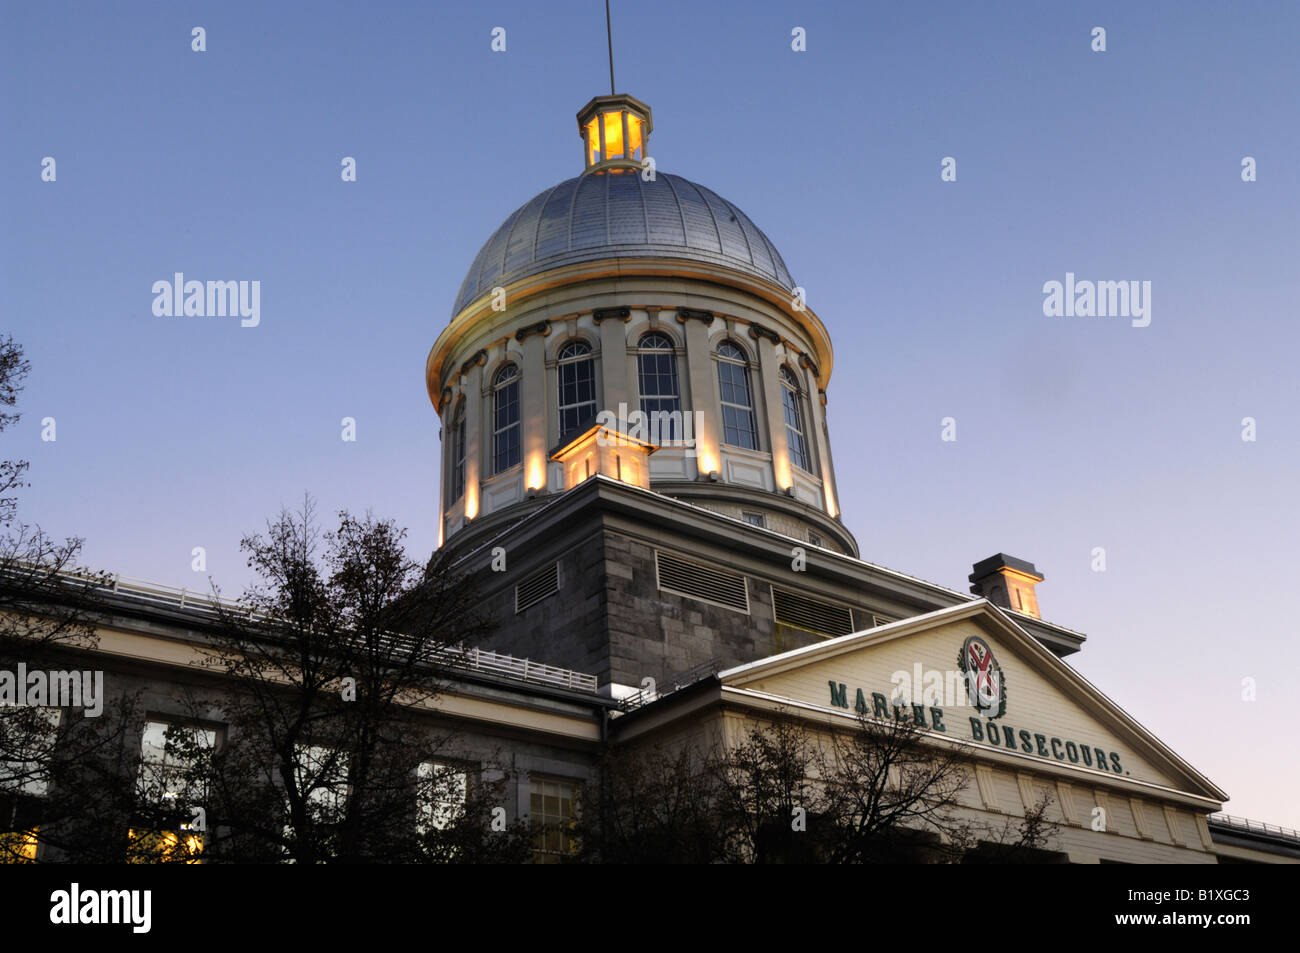 Canada, Montreal, Bonsecours Market, low angle view Stock Photo